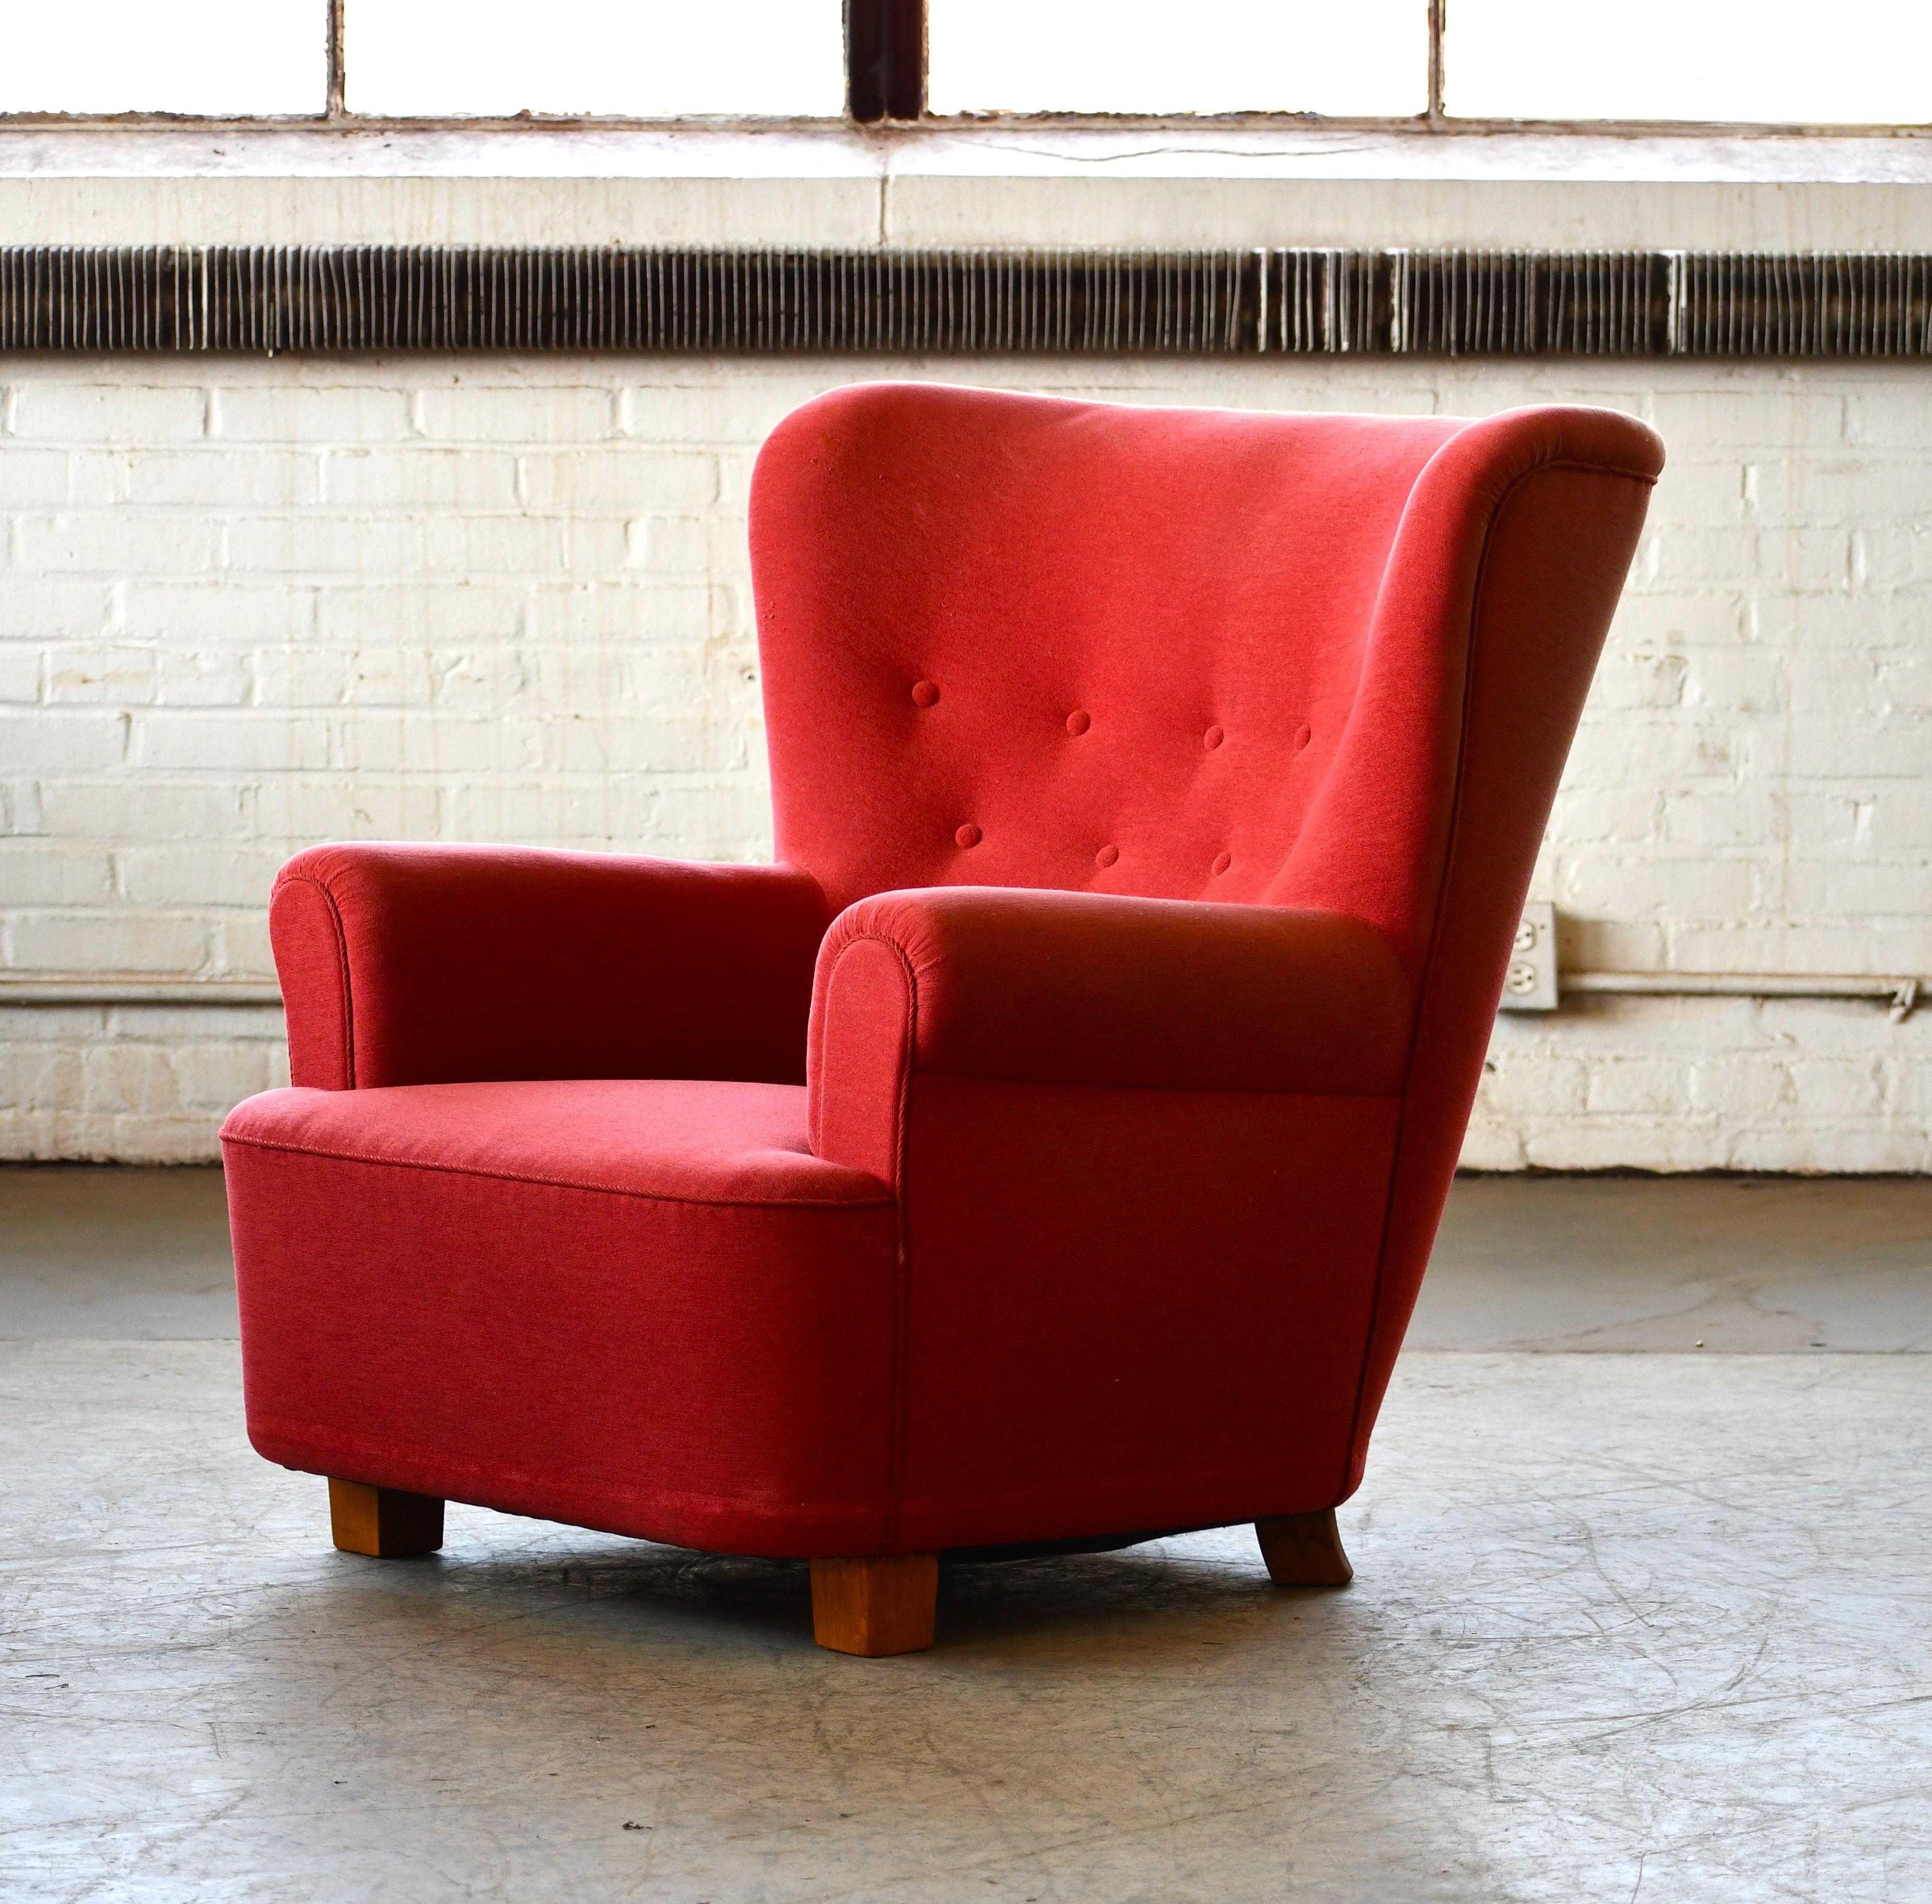 Mid-20th Century Danish Midcentury Large Scale Club or Lounge Chair 1940s For Sale